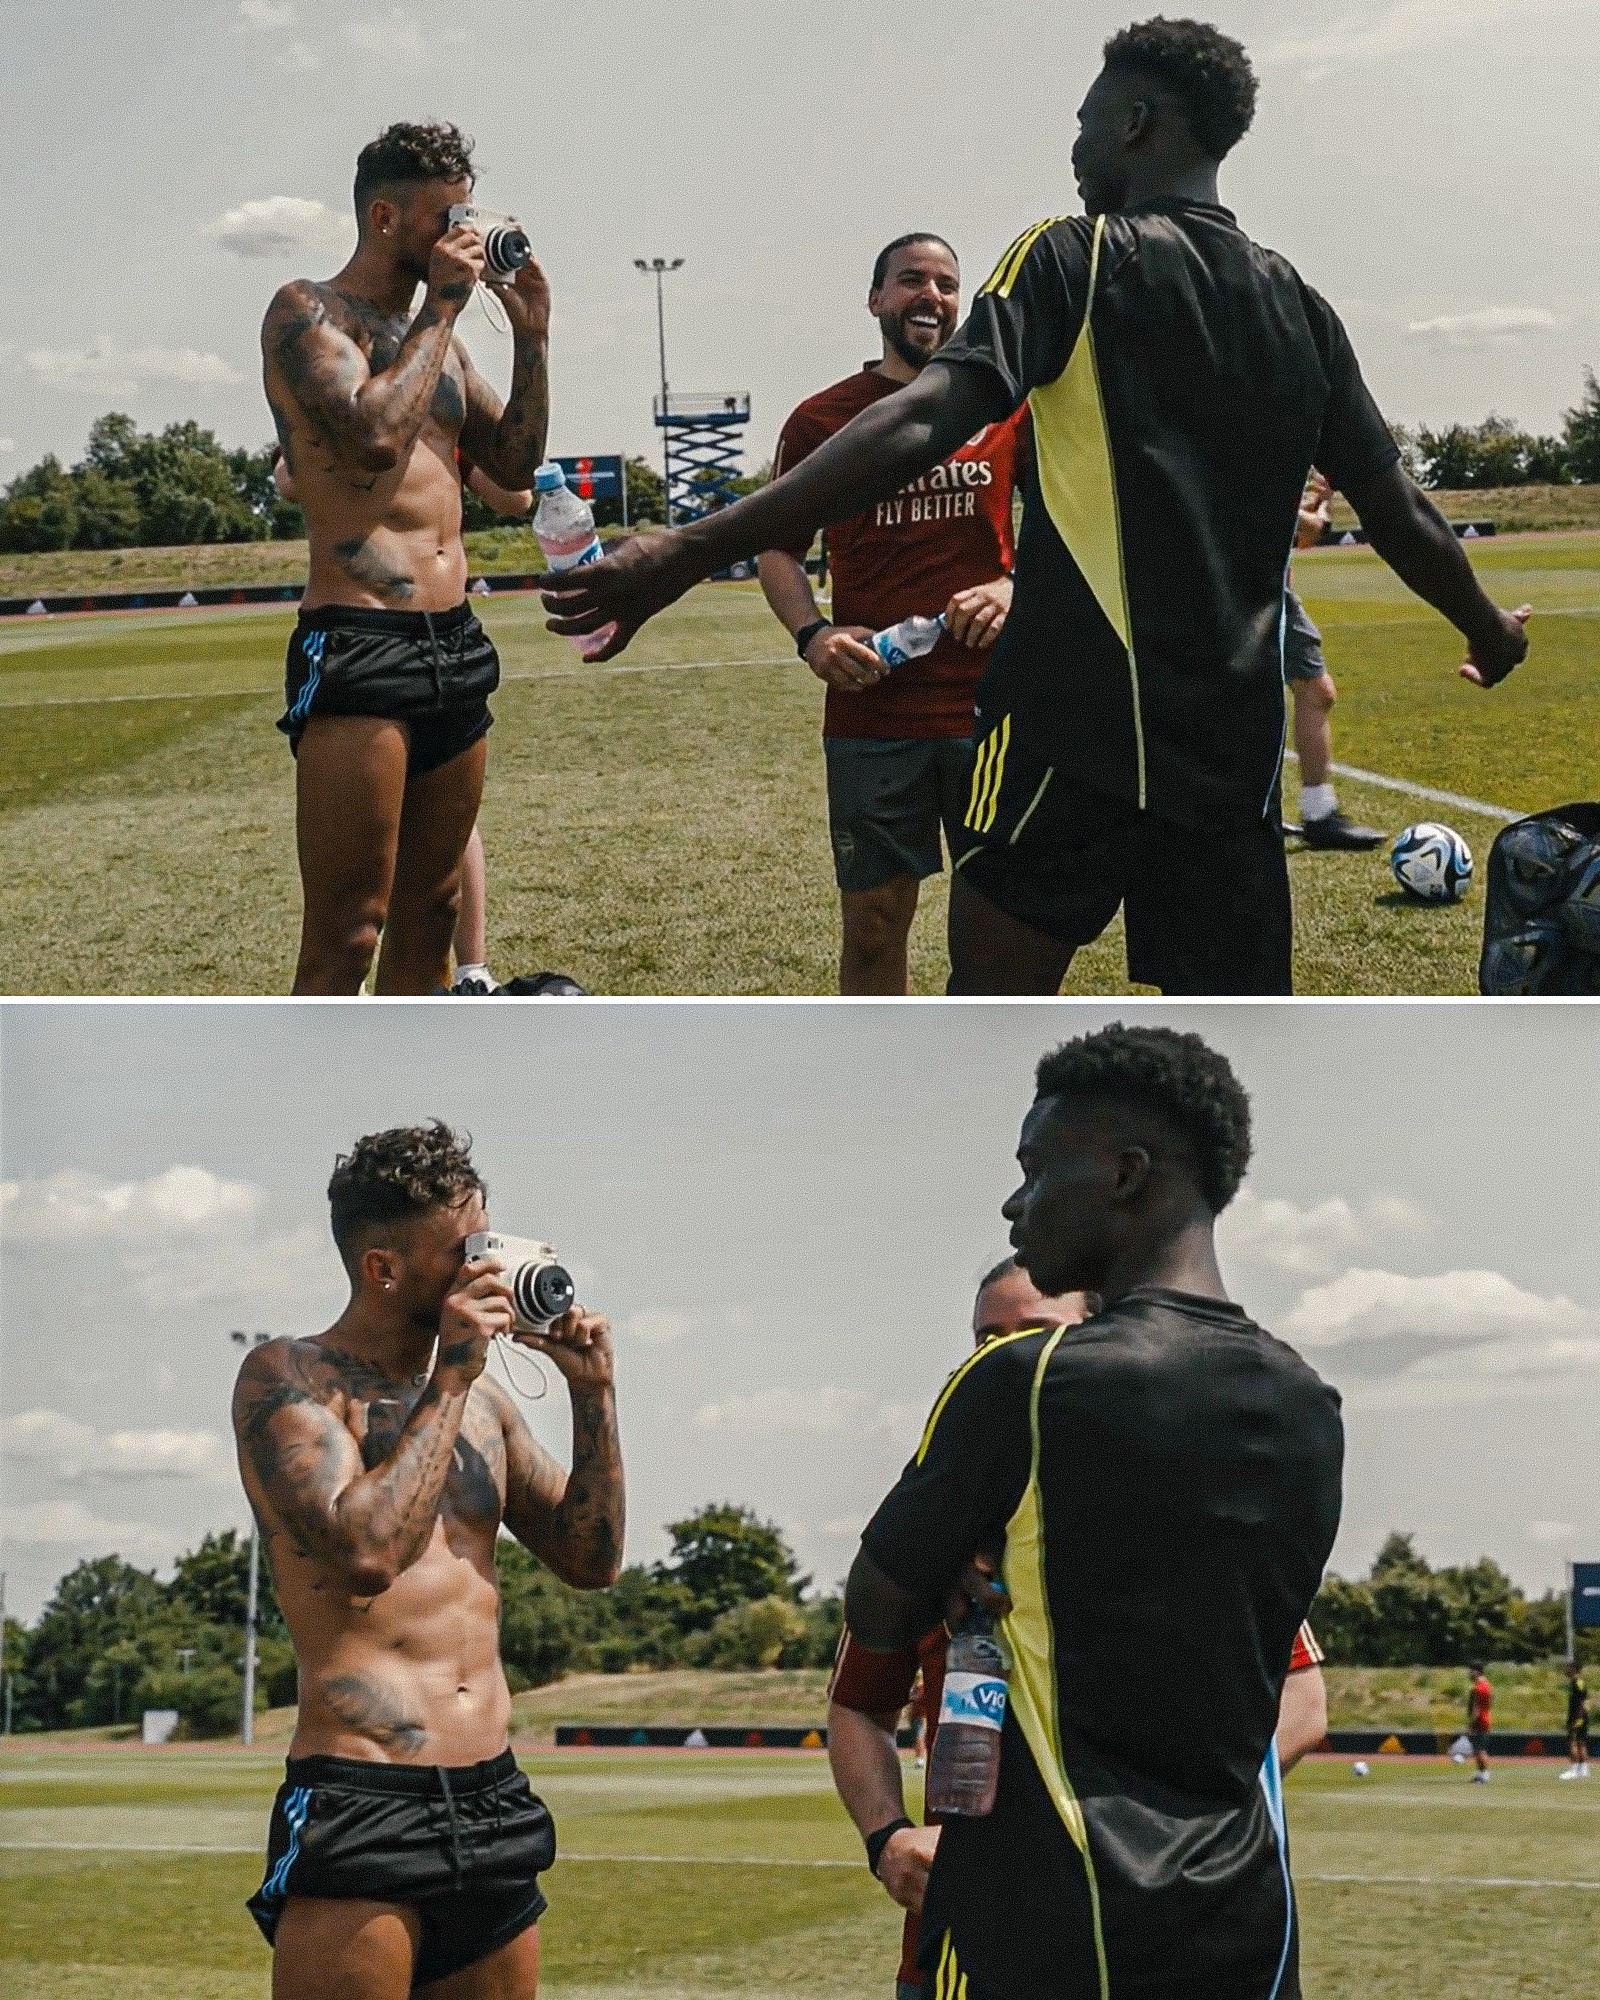 rr Capturing the essence of Arsenal's training session, talented photographer Ben White skillfully frames thought-provoking shots of Bukayo Saka's determination, beautifully showcasing the raw intensity and growth of a promising young talent. - LifeAnimal